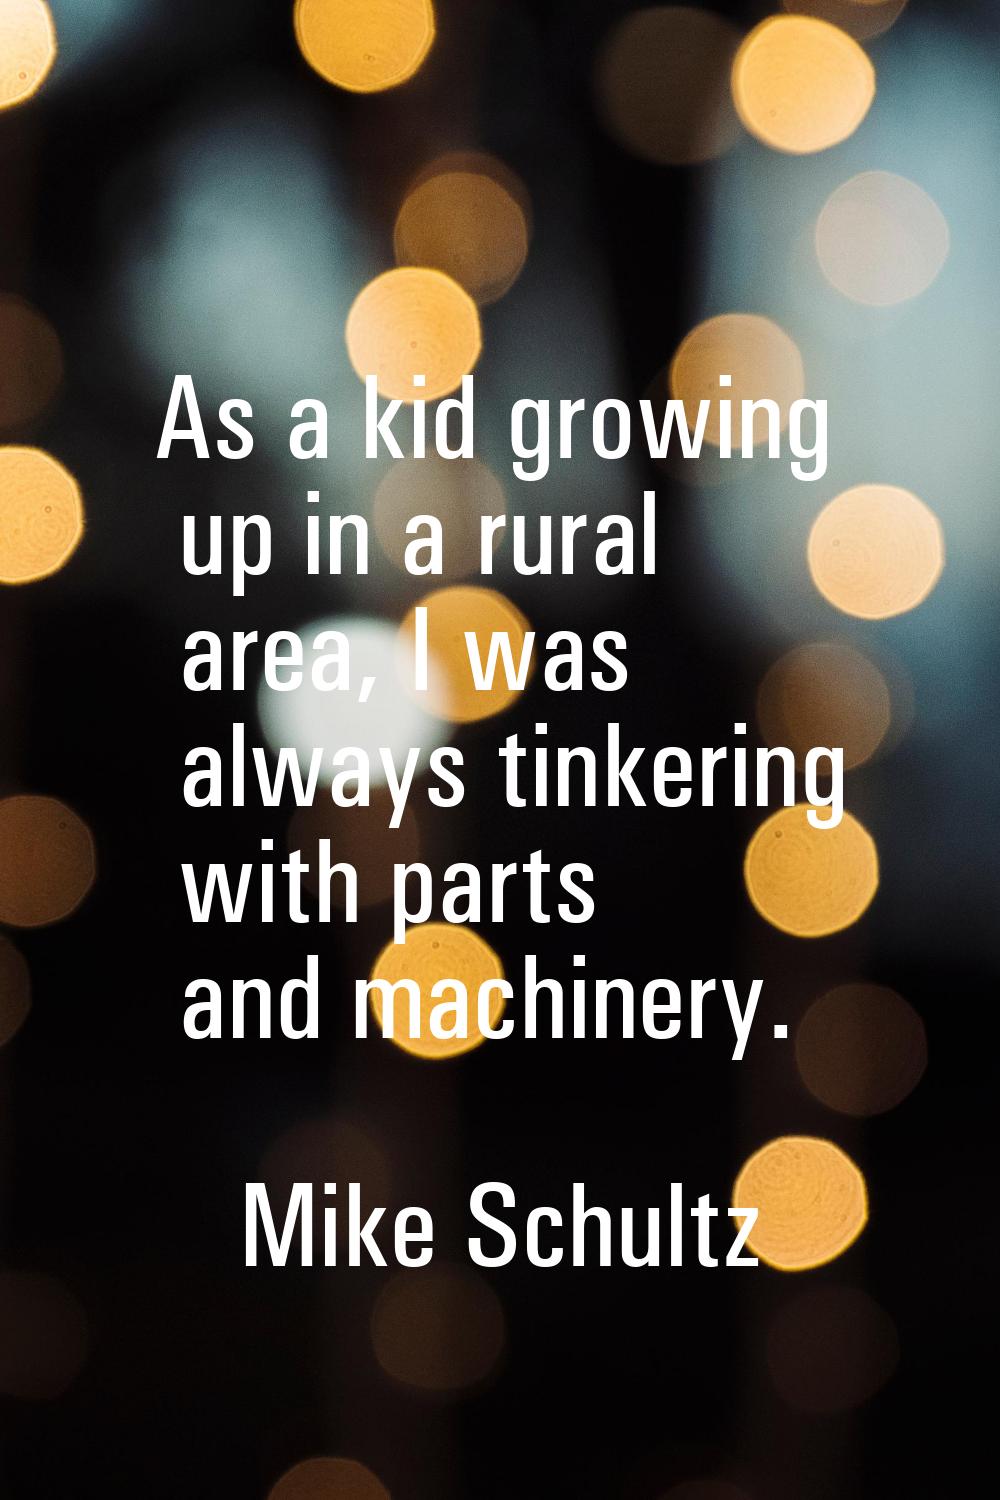 As a kid growing up in a rural area, I was always tinkering with parts and machinery.